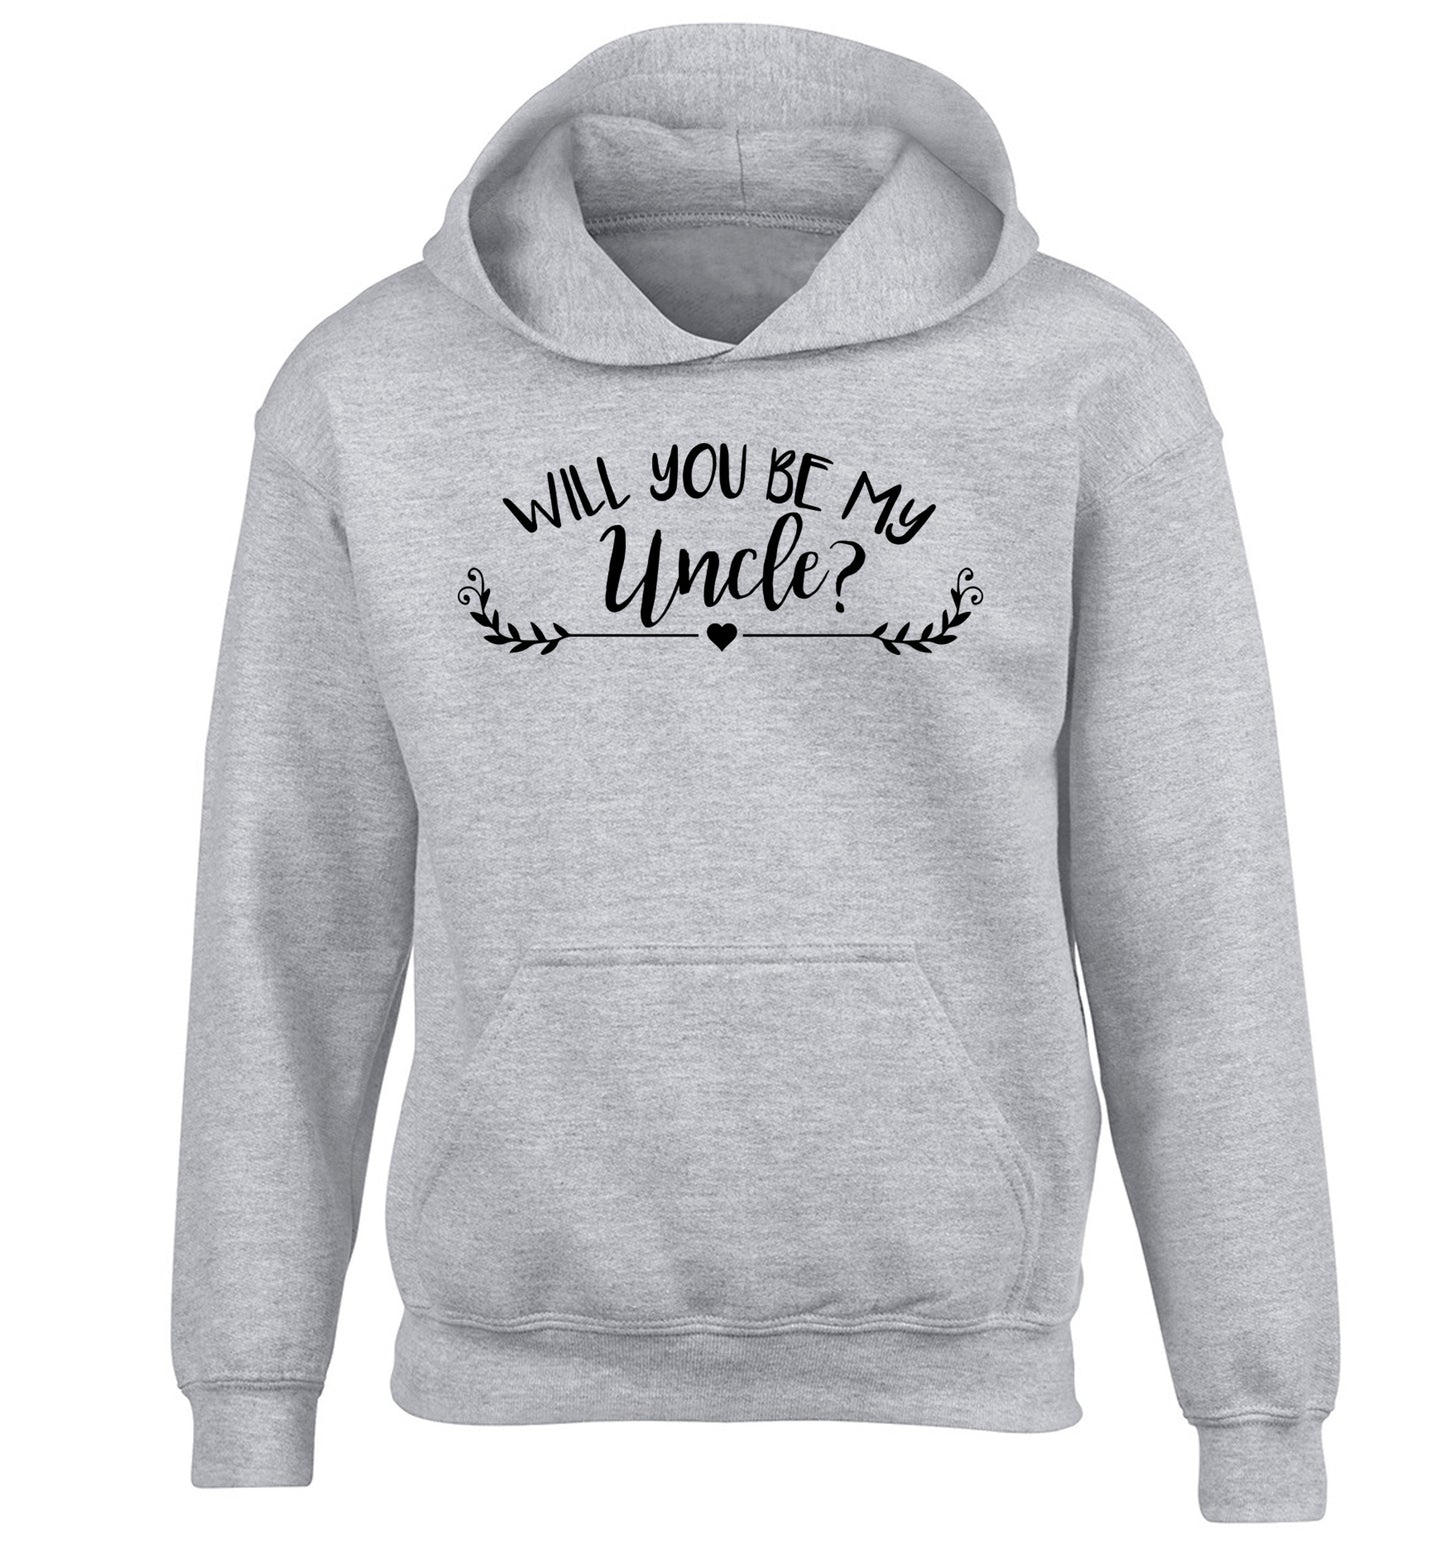 Will you be my uncle? children's grey hoodie 12-14 Years